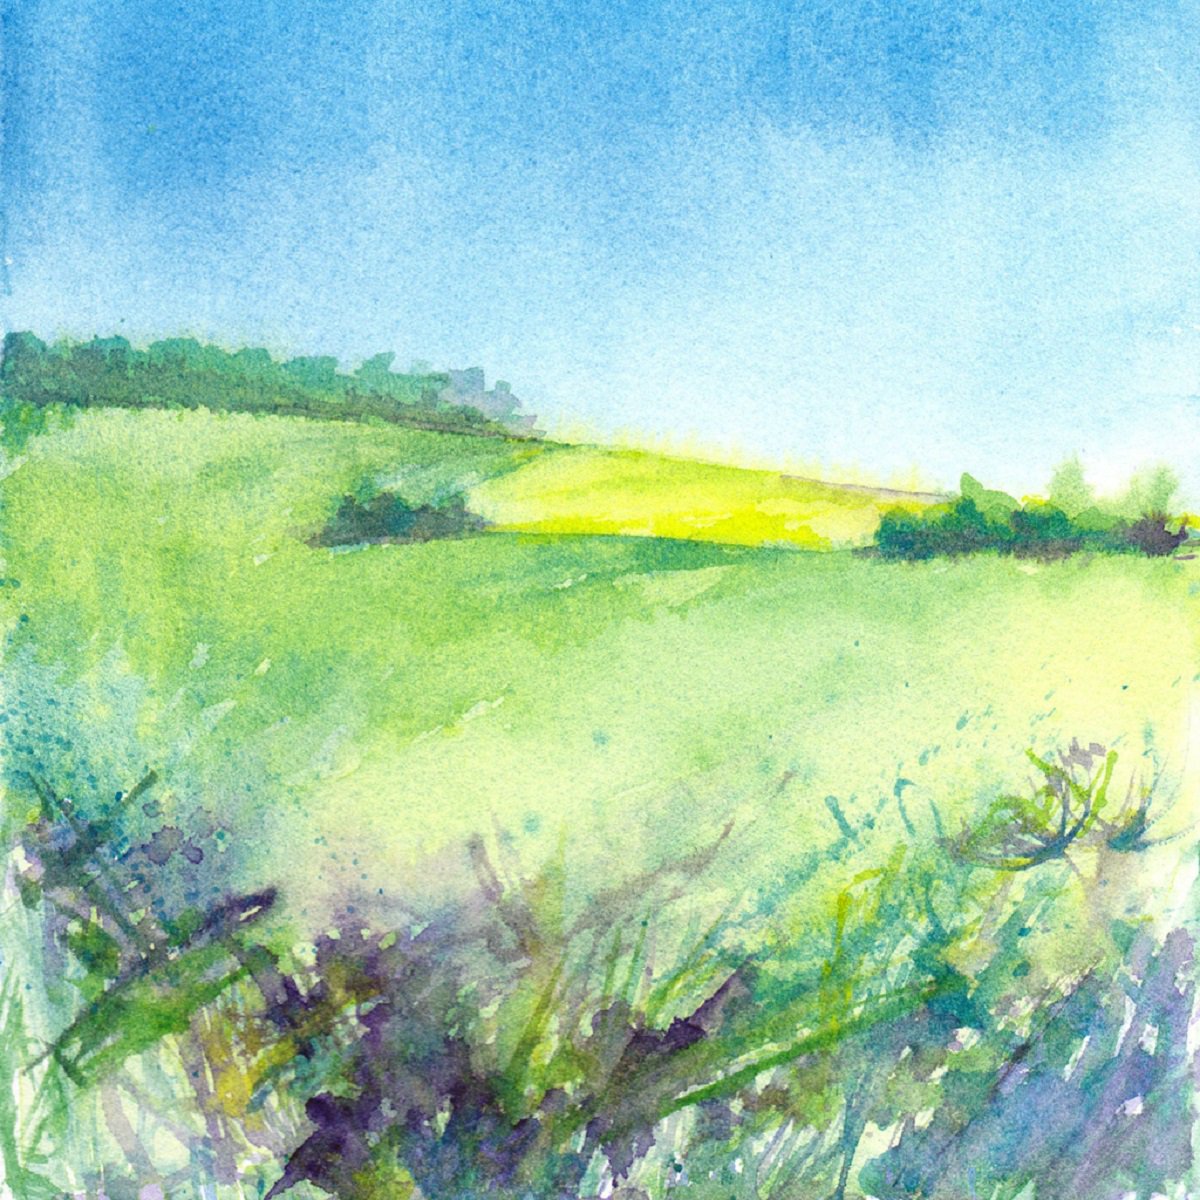 Yellow field Painting, Original Landscape Painting, Original Watercolour Painting, Square... by Anjana Cawdell